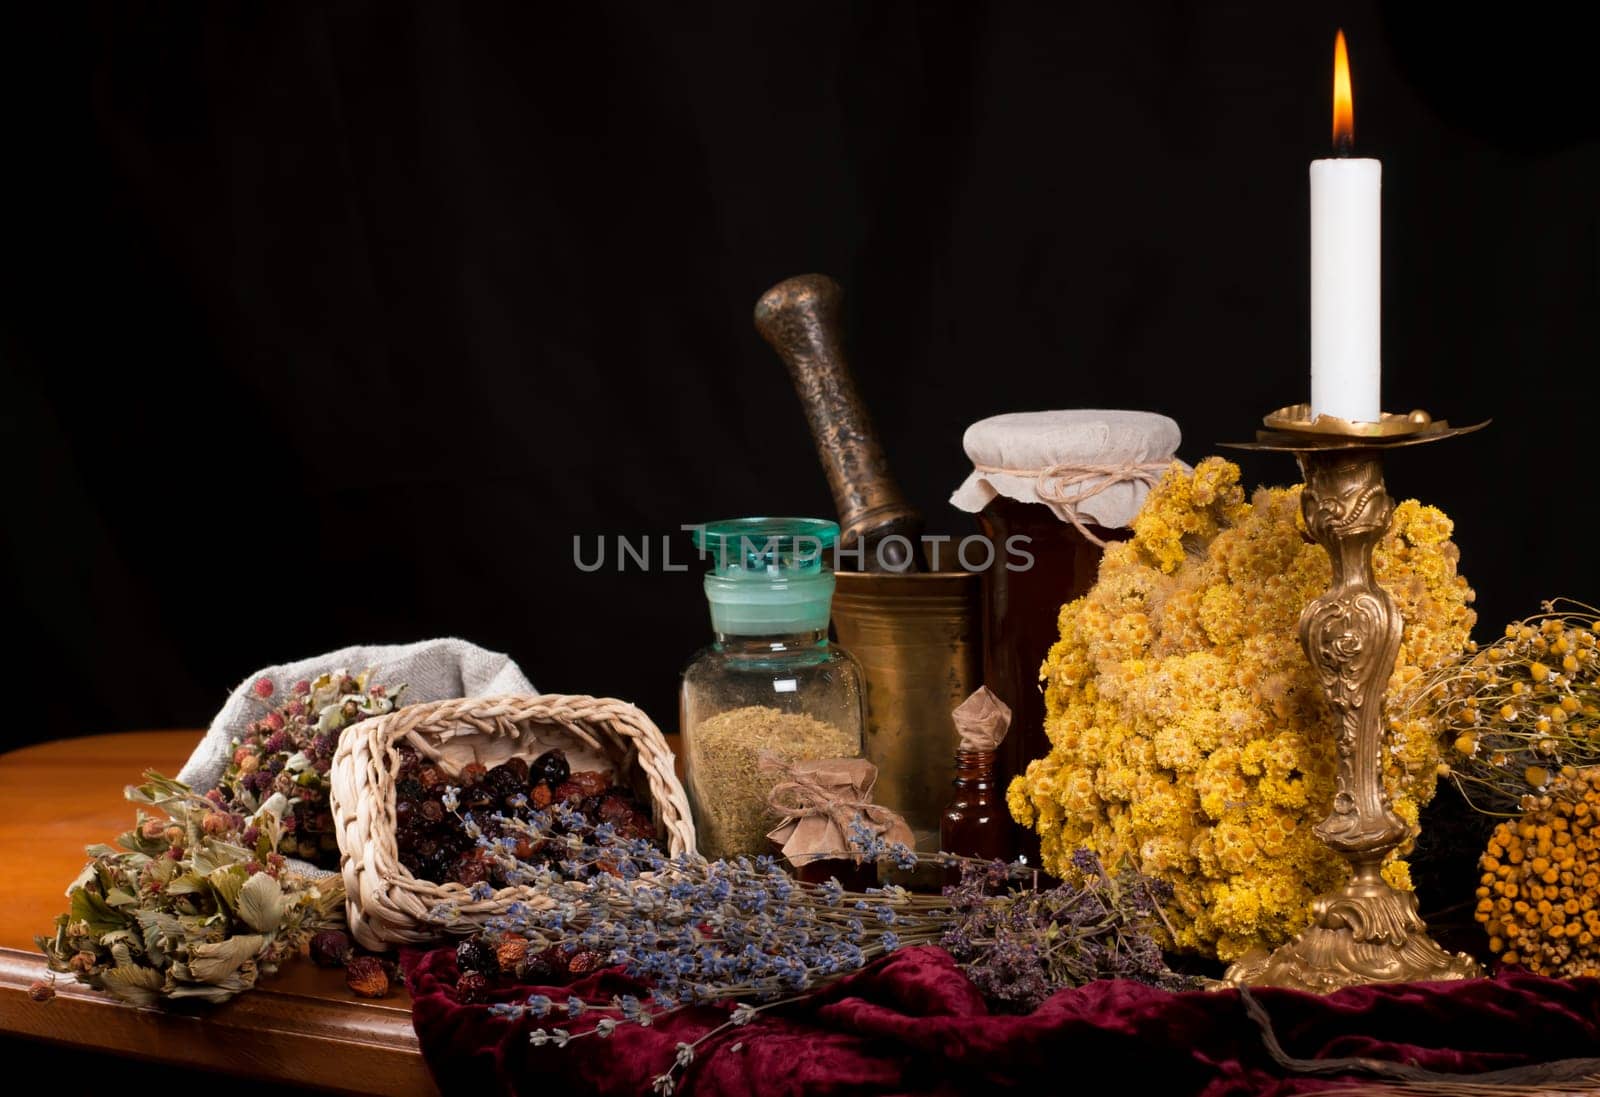 mortar and pestle. on a black background. wooden table. Dried healing herbs, flowers and candles, ritual purification , copyspace Close up of healing herbs alchemist stuff. Old pharmacy, alternative medicine concept. Fromt view.